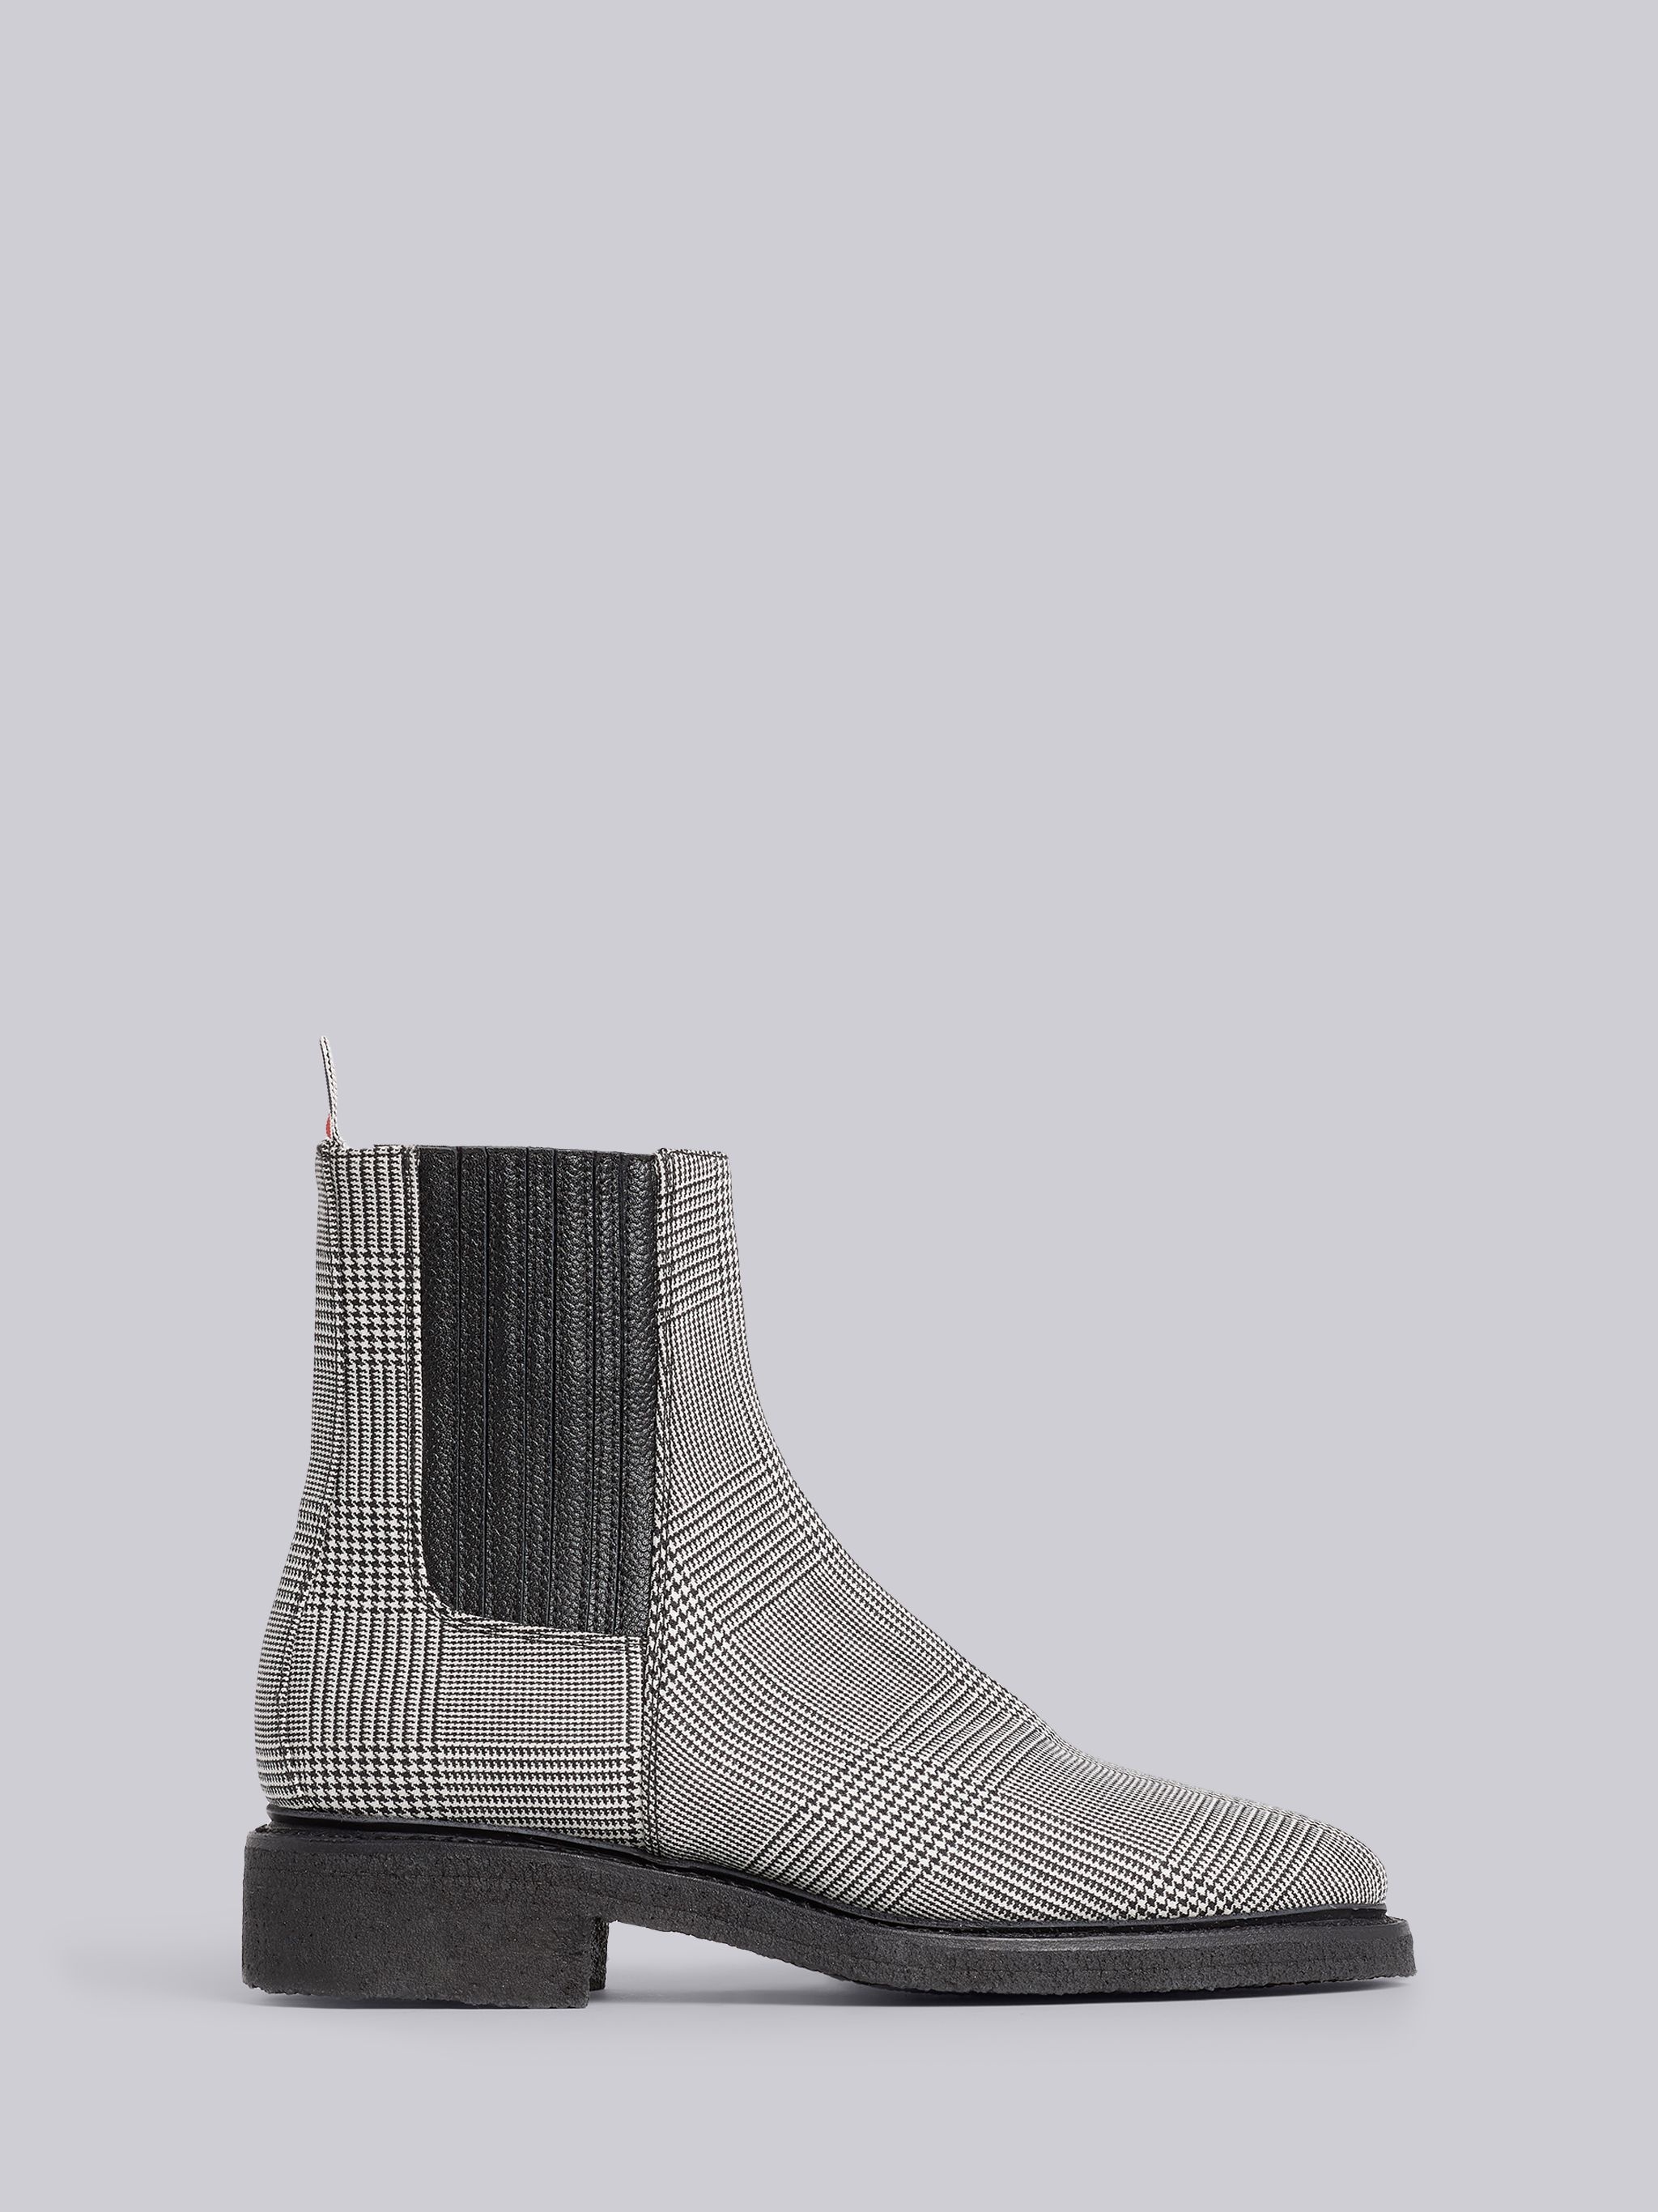 Black and White Prince of Wales Crepe Sole Chelsea Boot - 1